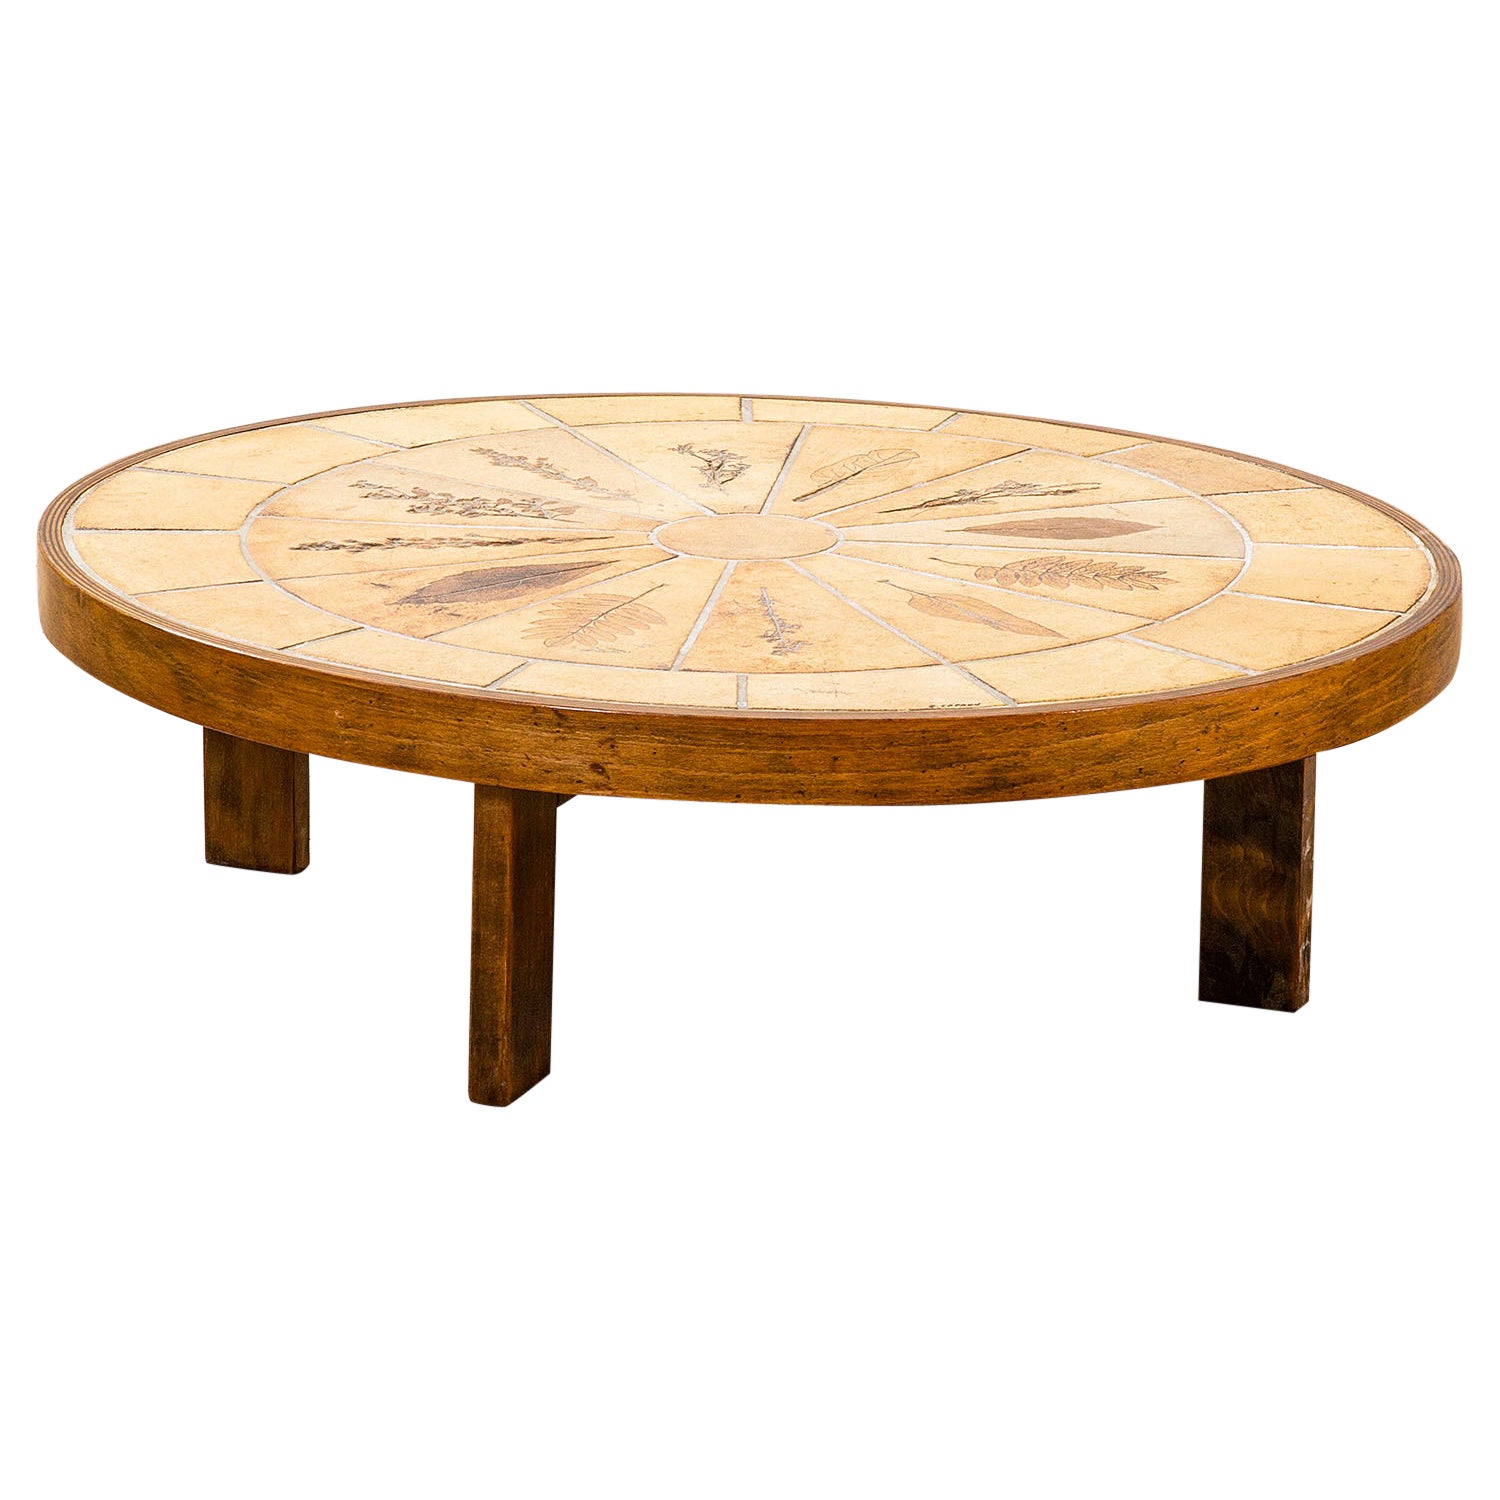 20th Century Roger Capron Low Table Mod. Pomone in Wood and Ceramic, 70s For Sale